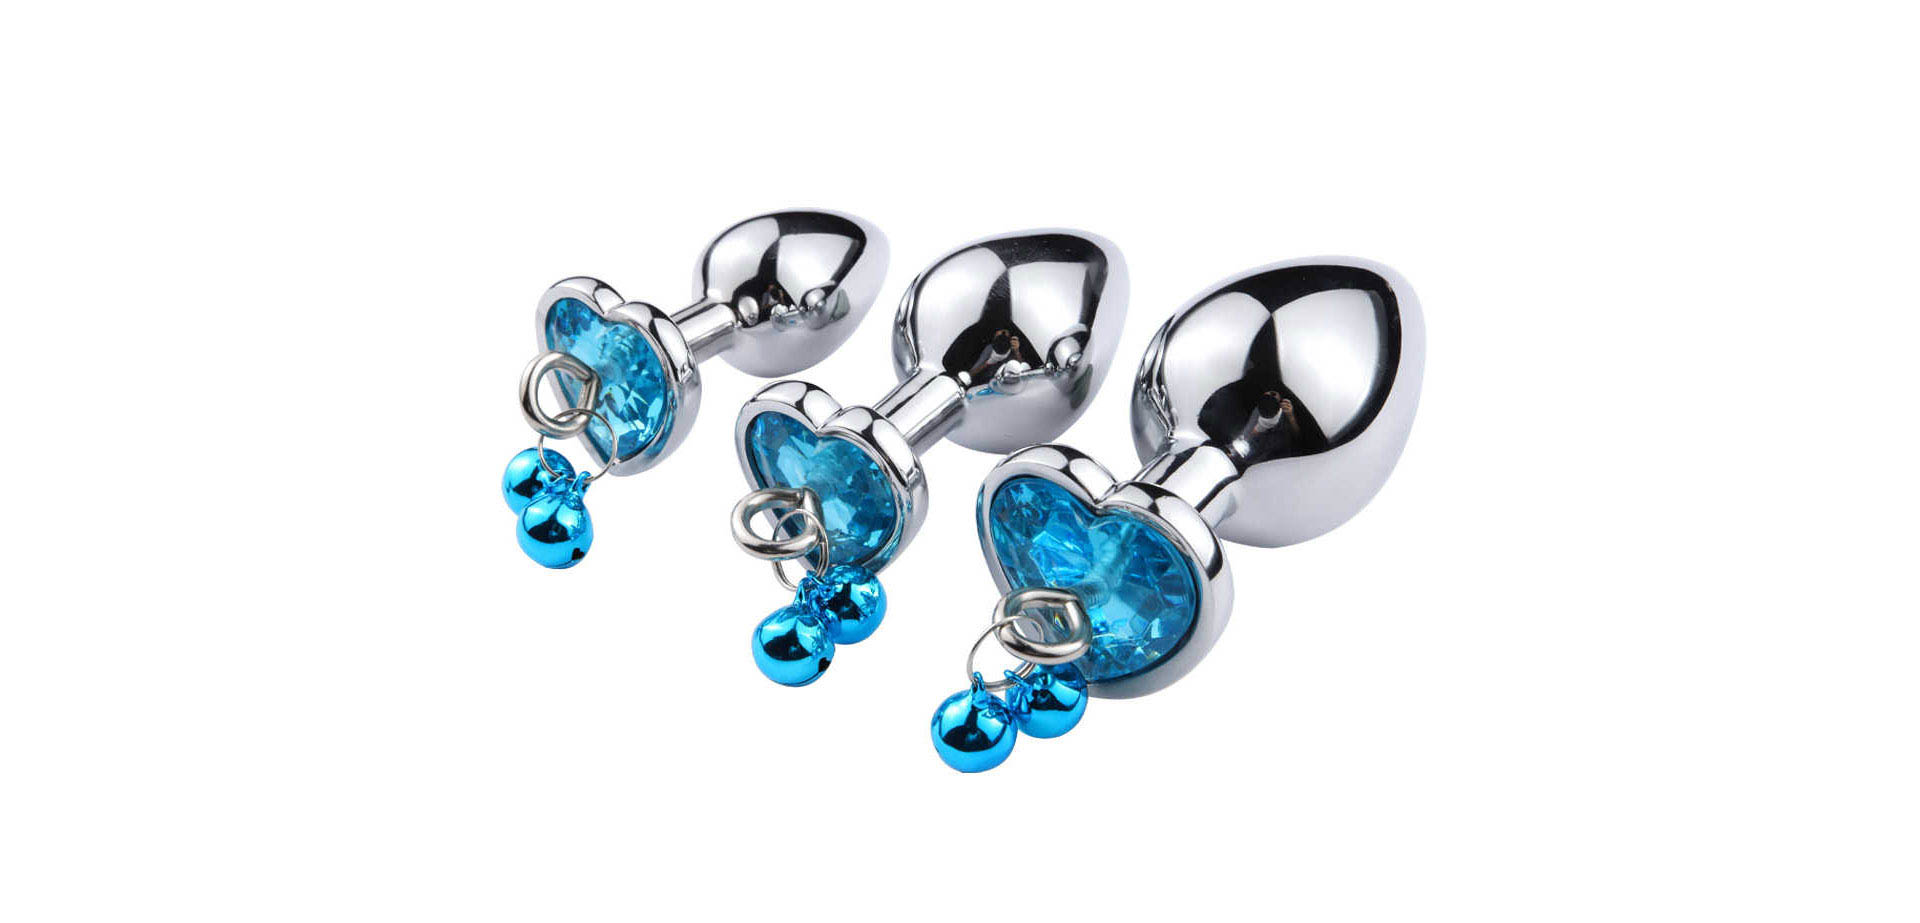 Vibrating Metal Anal Plugs With Bell.